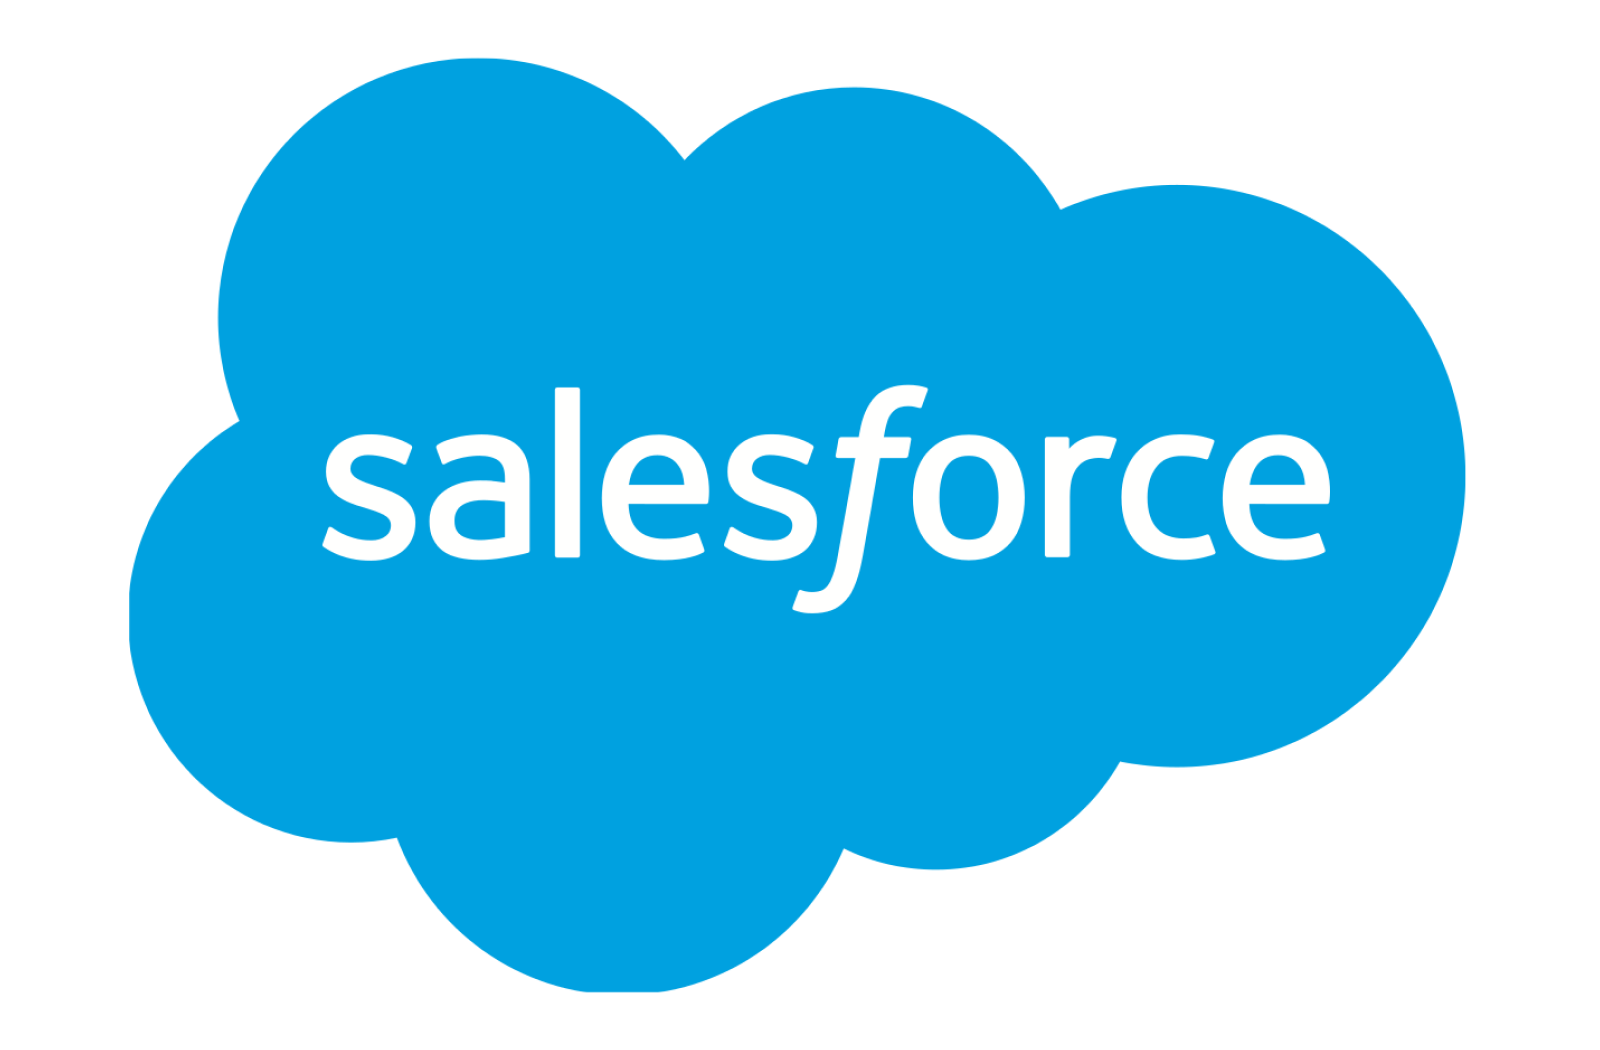 Salesforce is an iconic and wildly successful SaaS product that has revolutionized customer relationship management (CRM). 